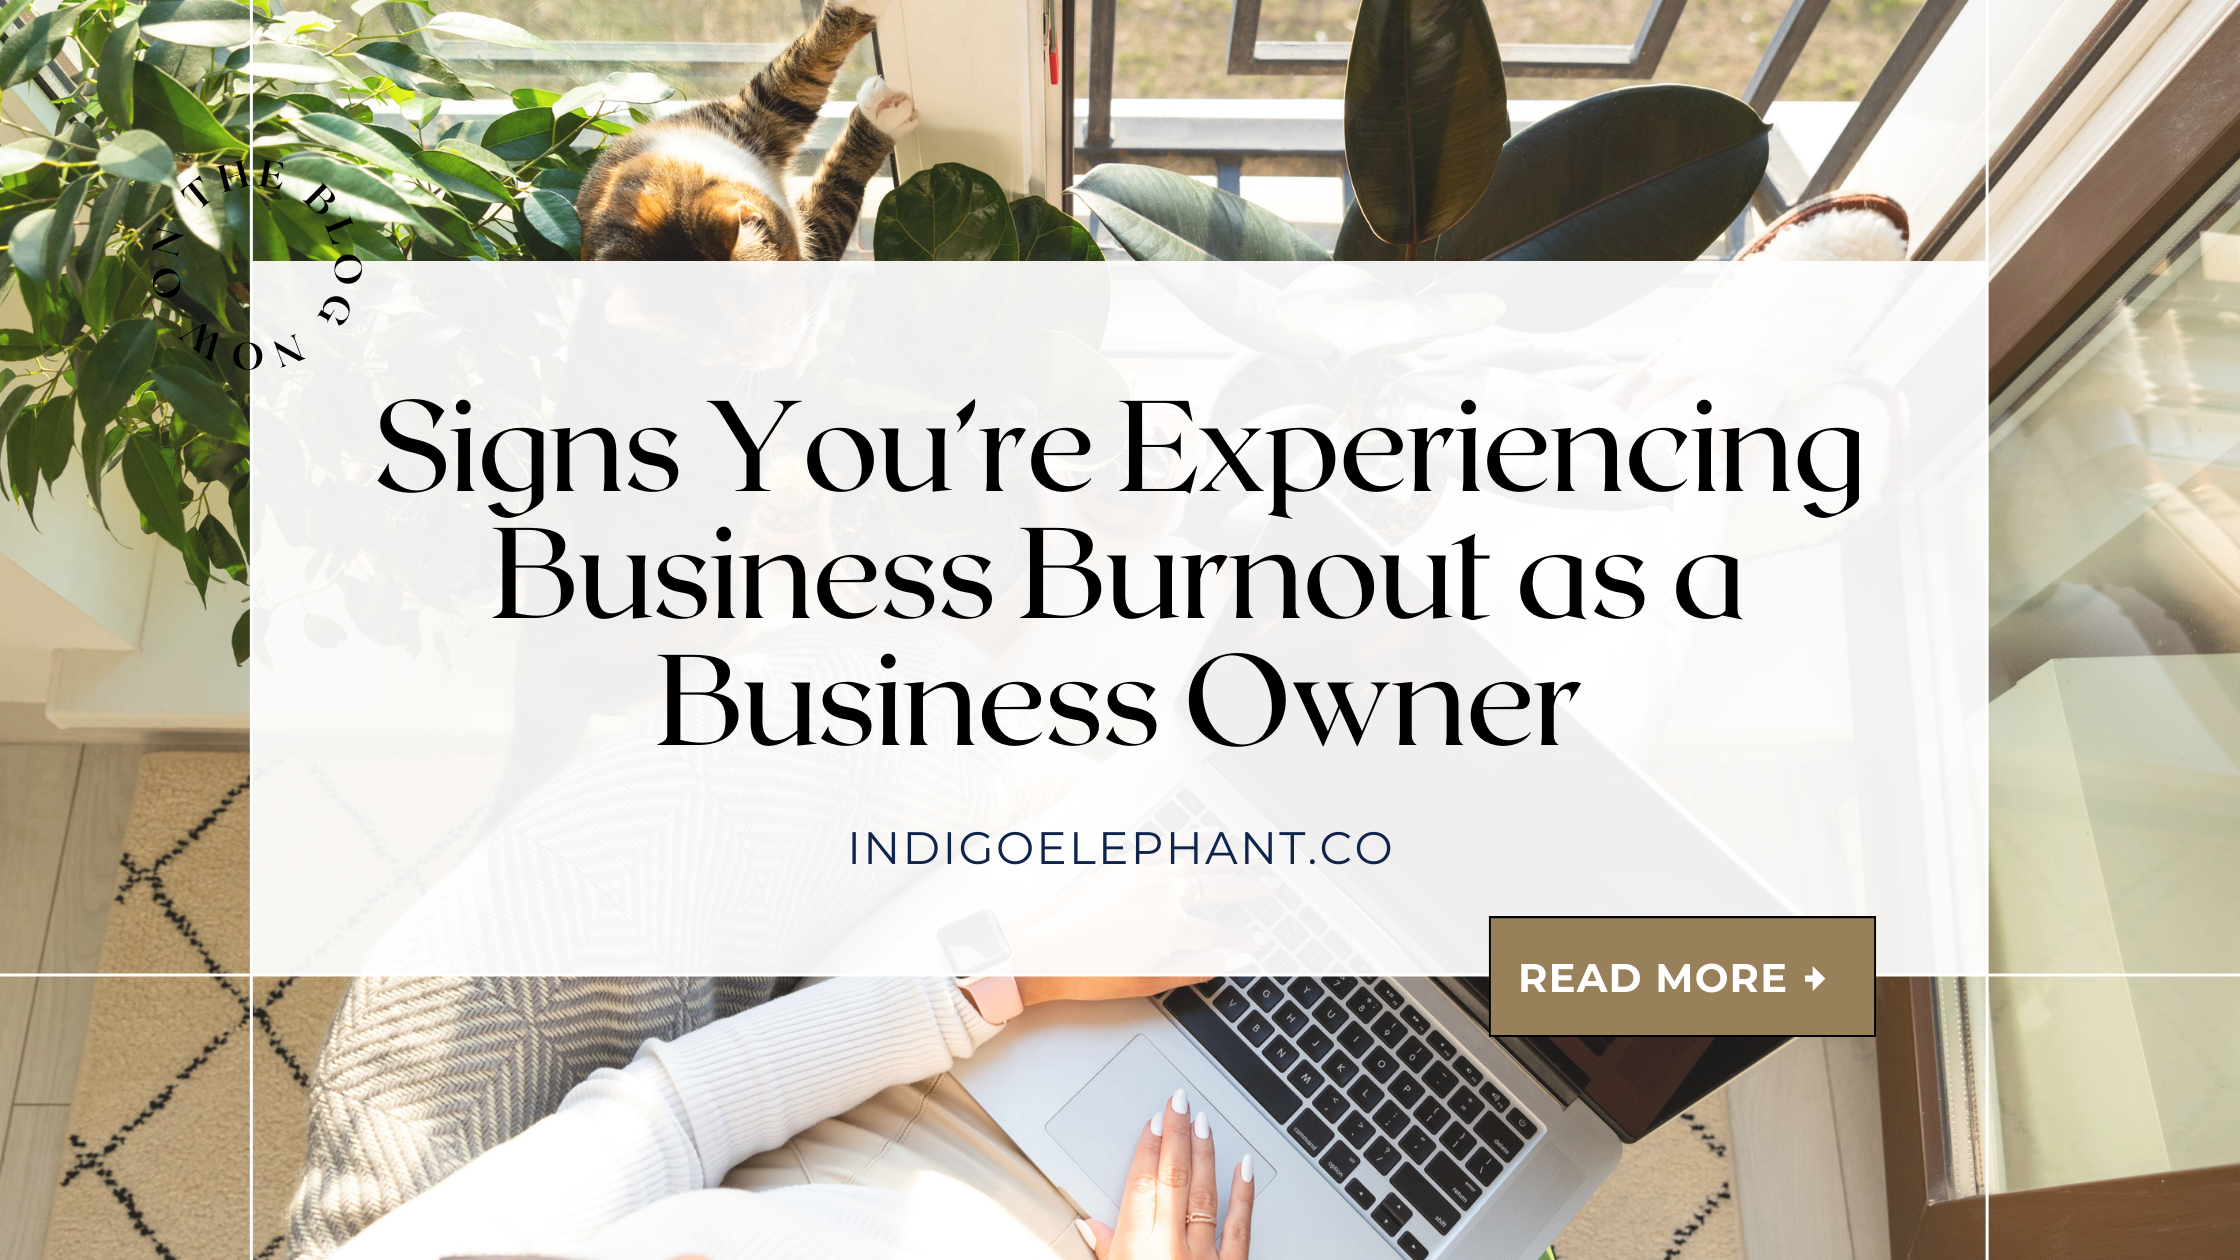 Signs You’re Experiencing Business Burnout as a Business Owner